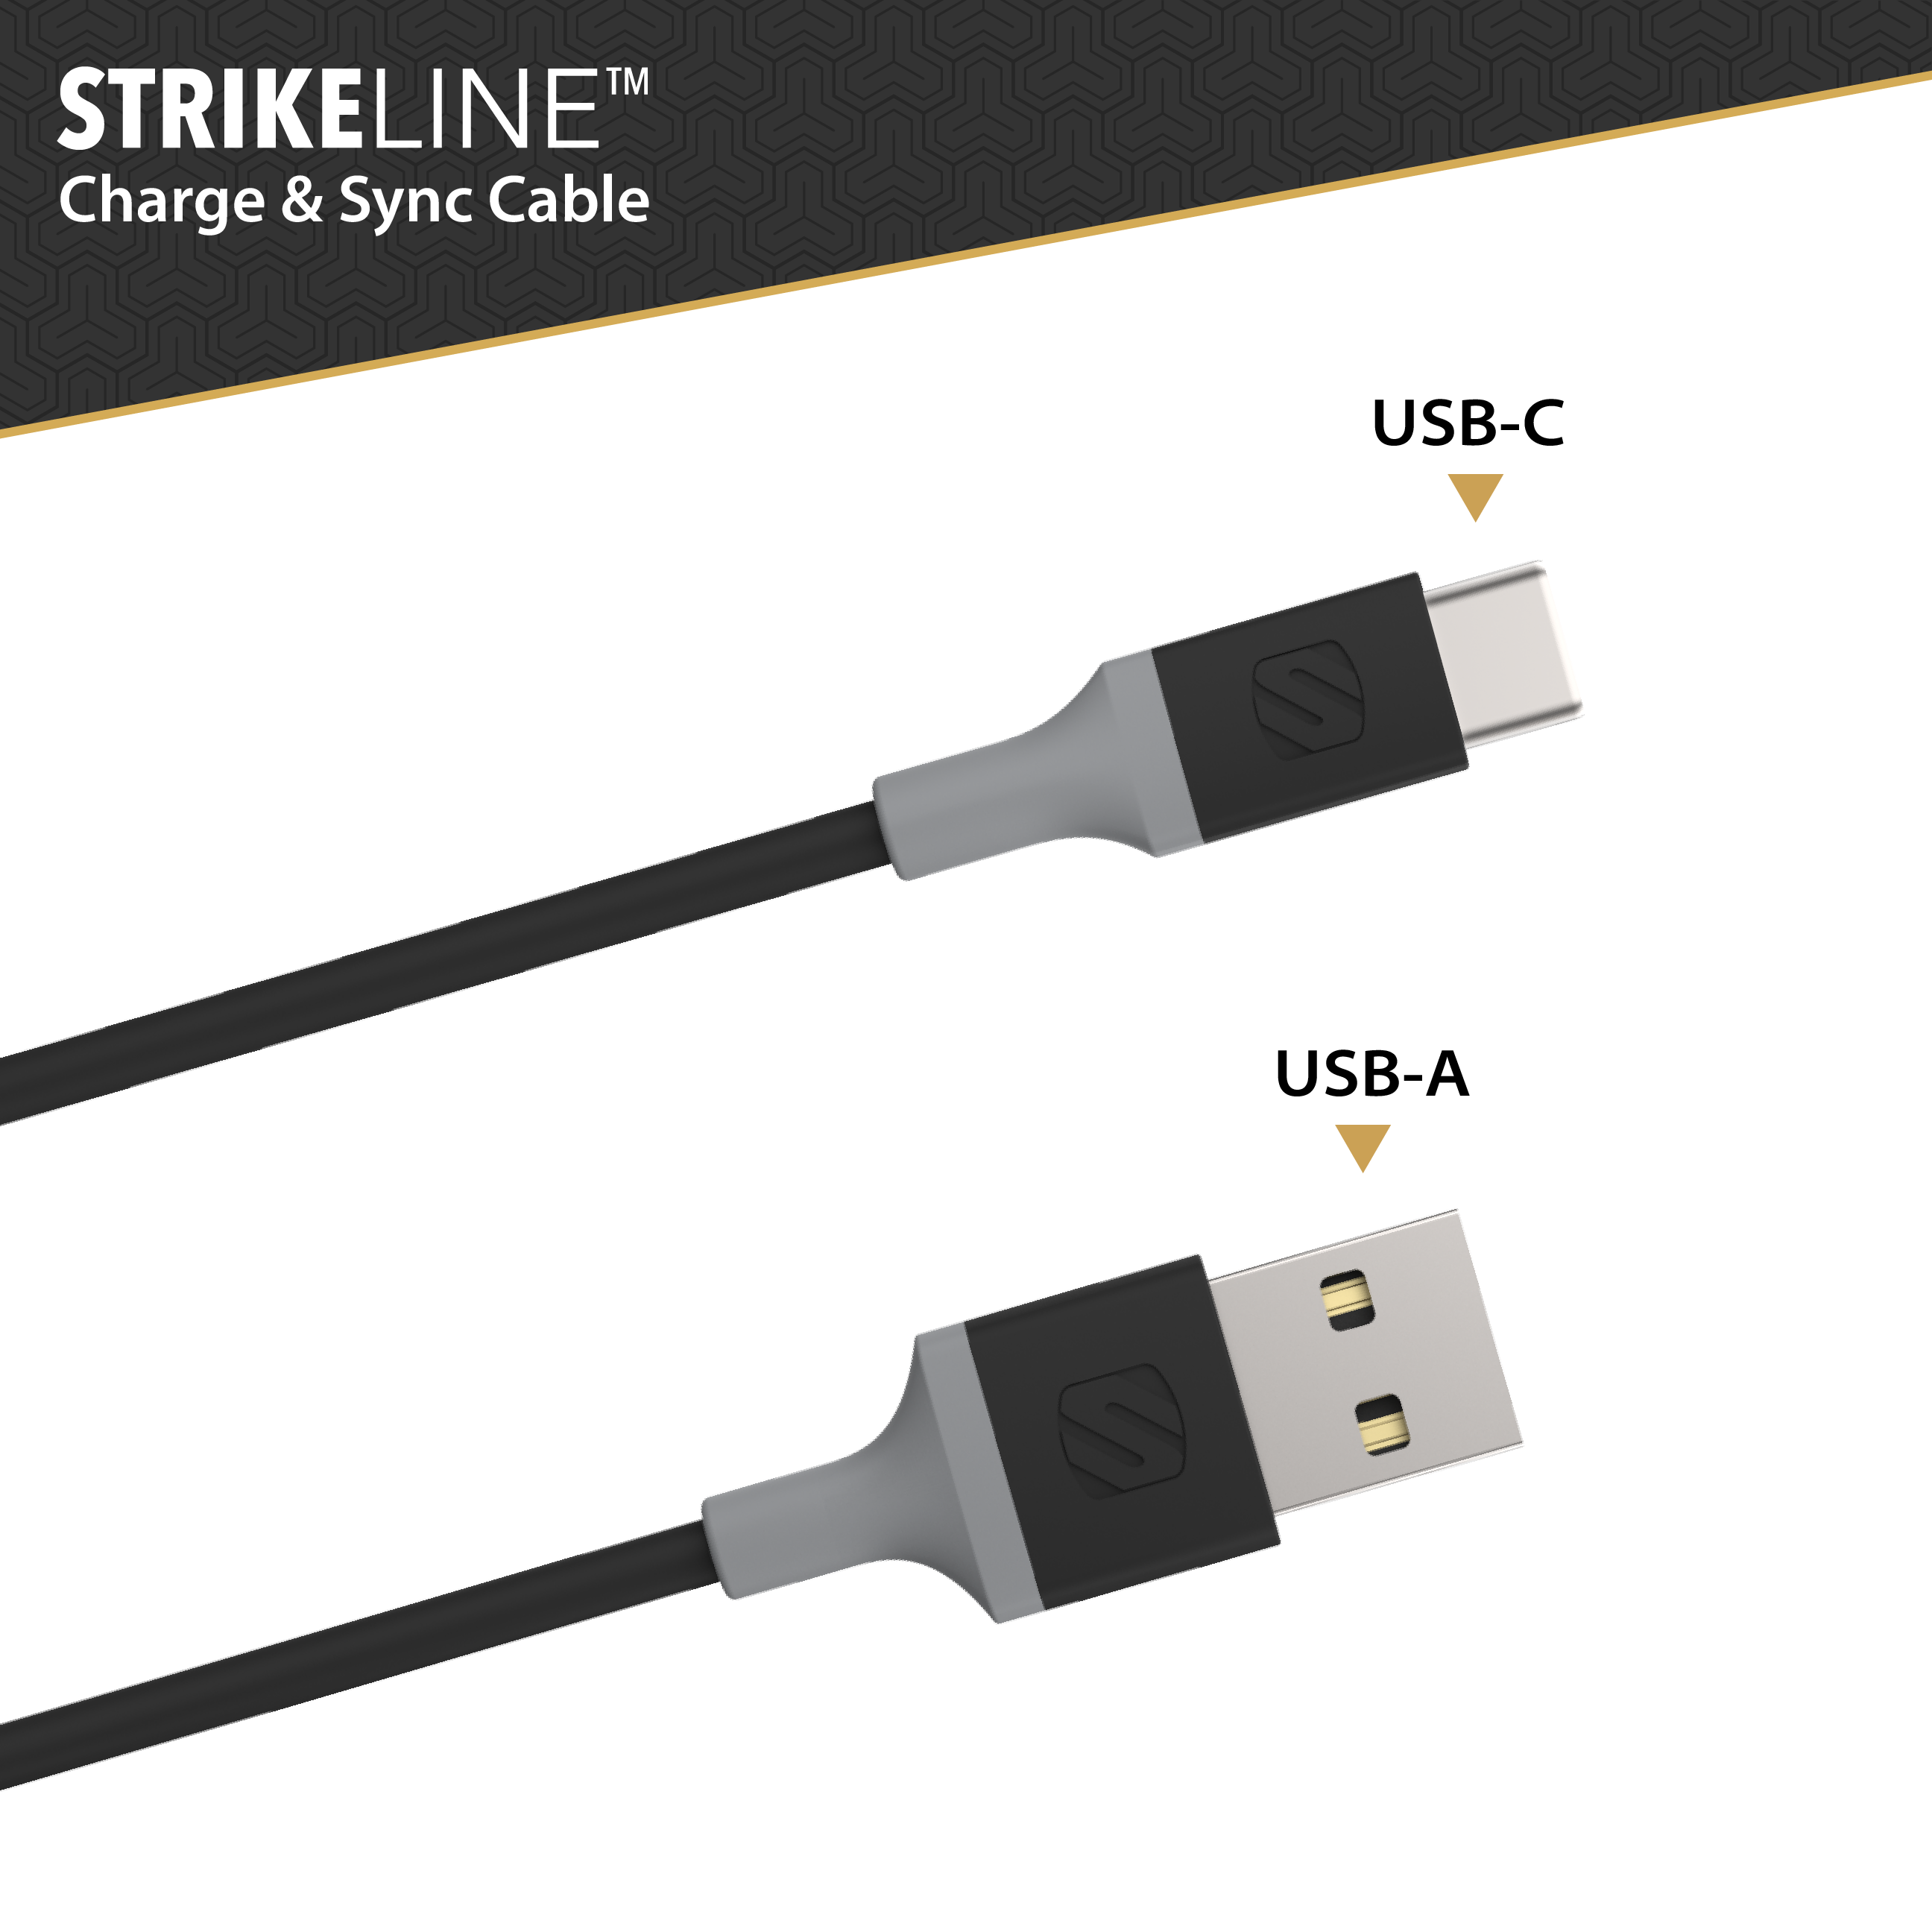 Scosche Ca4by-Sp Strikeline USB-A to USB-C & Sync Cable 4 ft. Space Gray - image 2 of 6